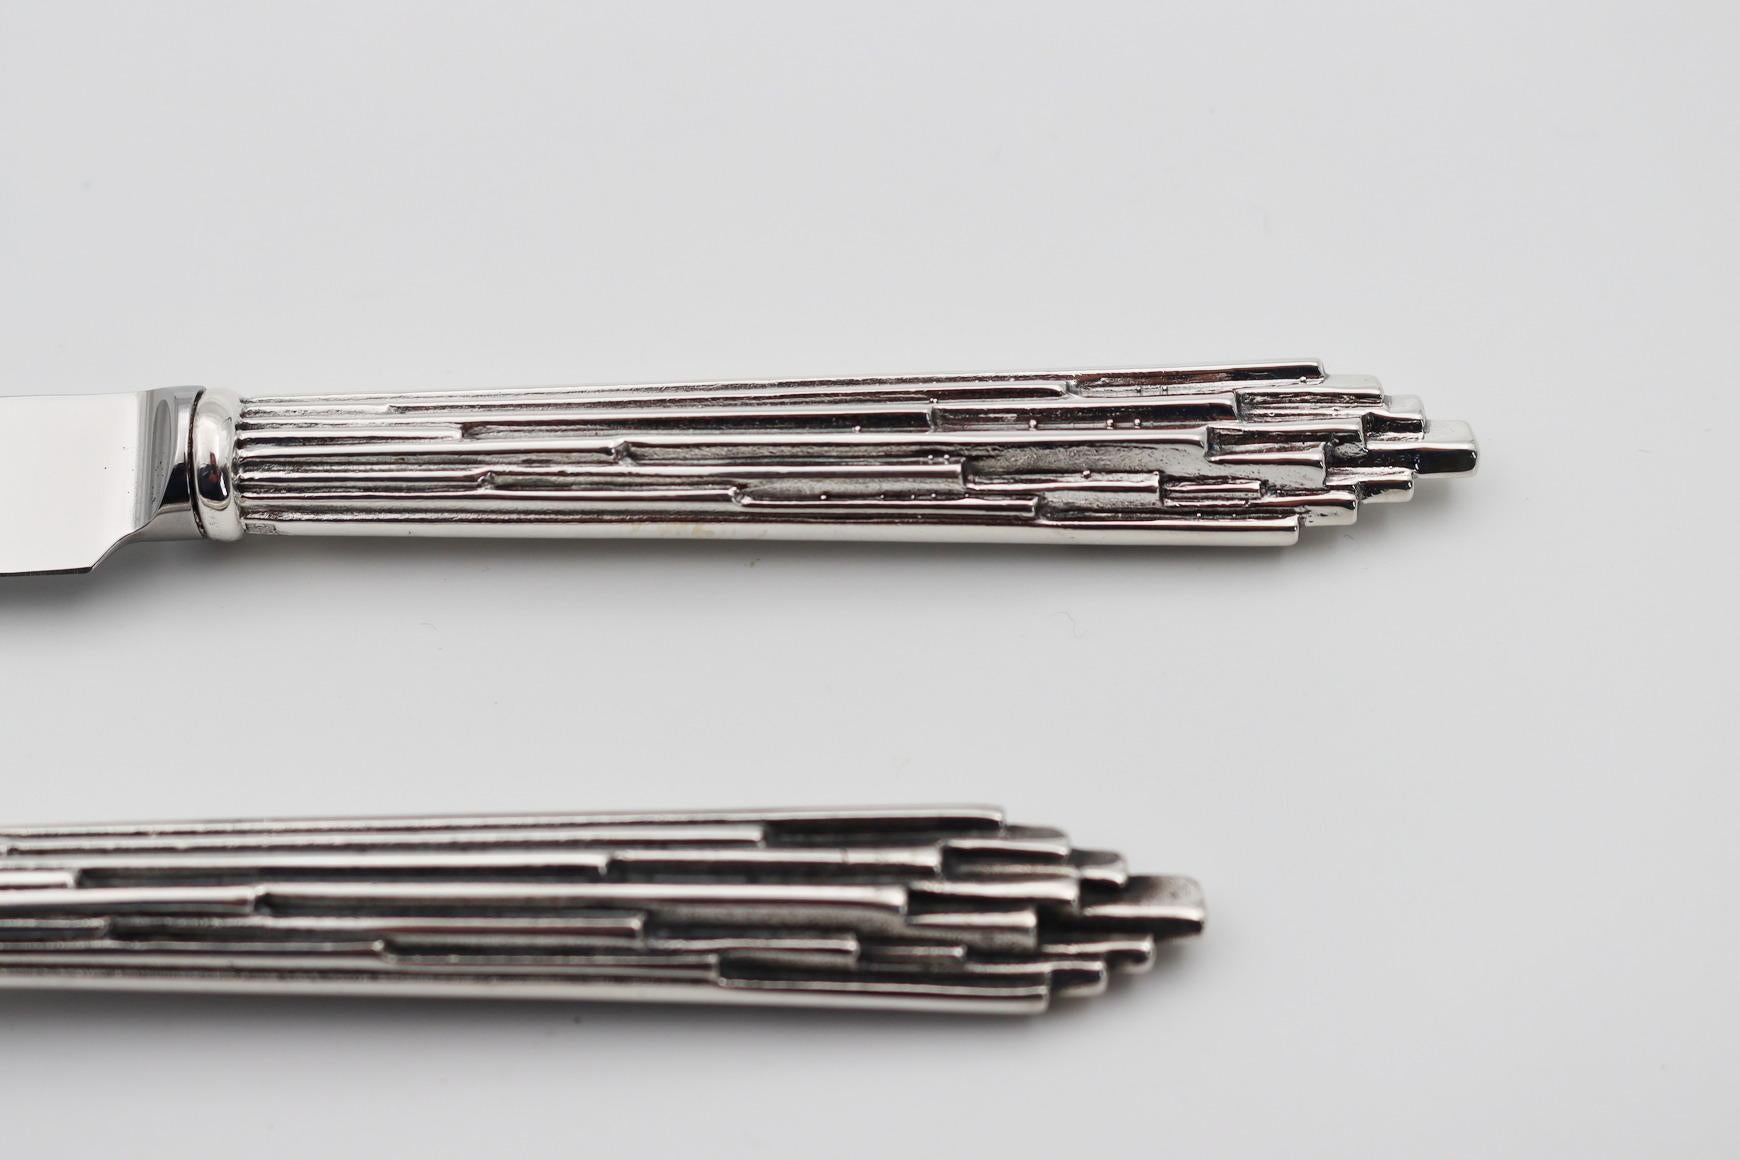 METROPOLIS set of 2 pieces in silver bronze or gold bronze

Set of 2 pieces (table forks/fish, table knife or meat/fish knife) in silver bronze 35/42 microns

It is possible to order all products separately or set of 4 piece

Table